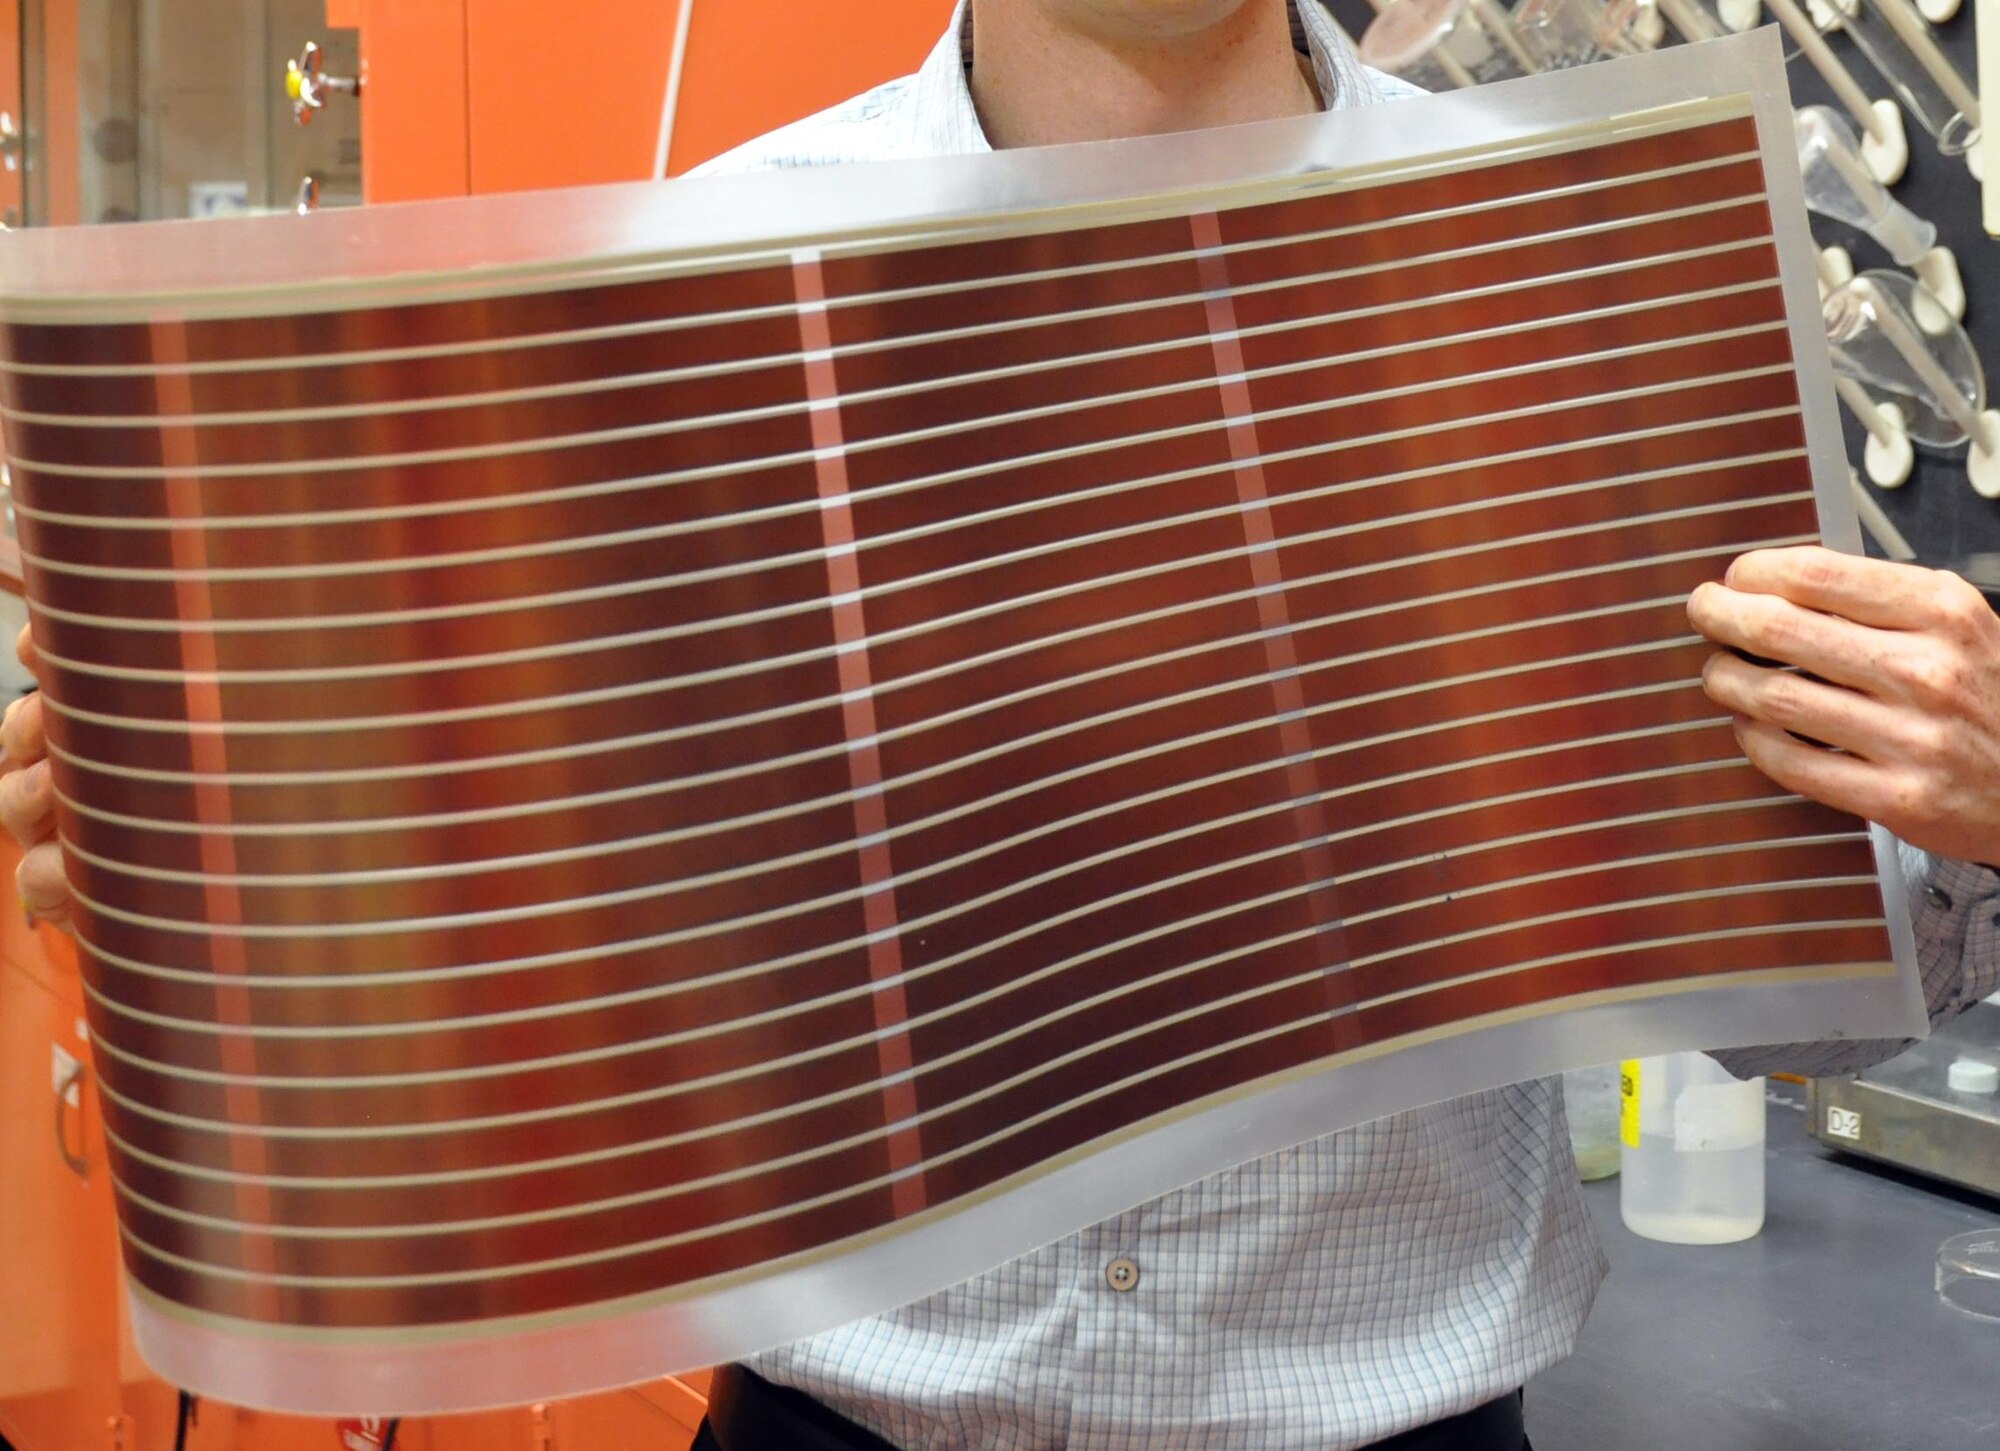 AFRL researchers have found an important source of performance variability in flexible solar cells such as this one, an essential component in evaluating new materials and architectures, and improving the efficiency of organic solar cells.  (AFRL Image)